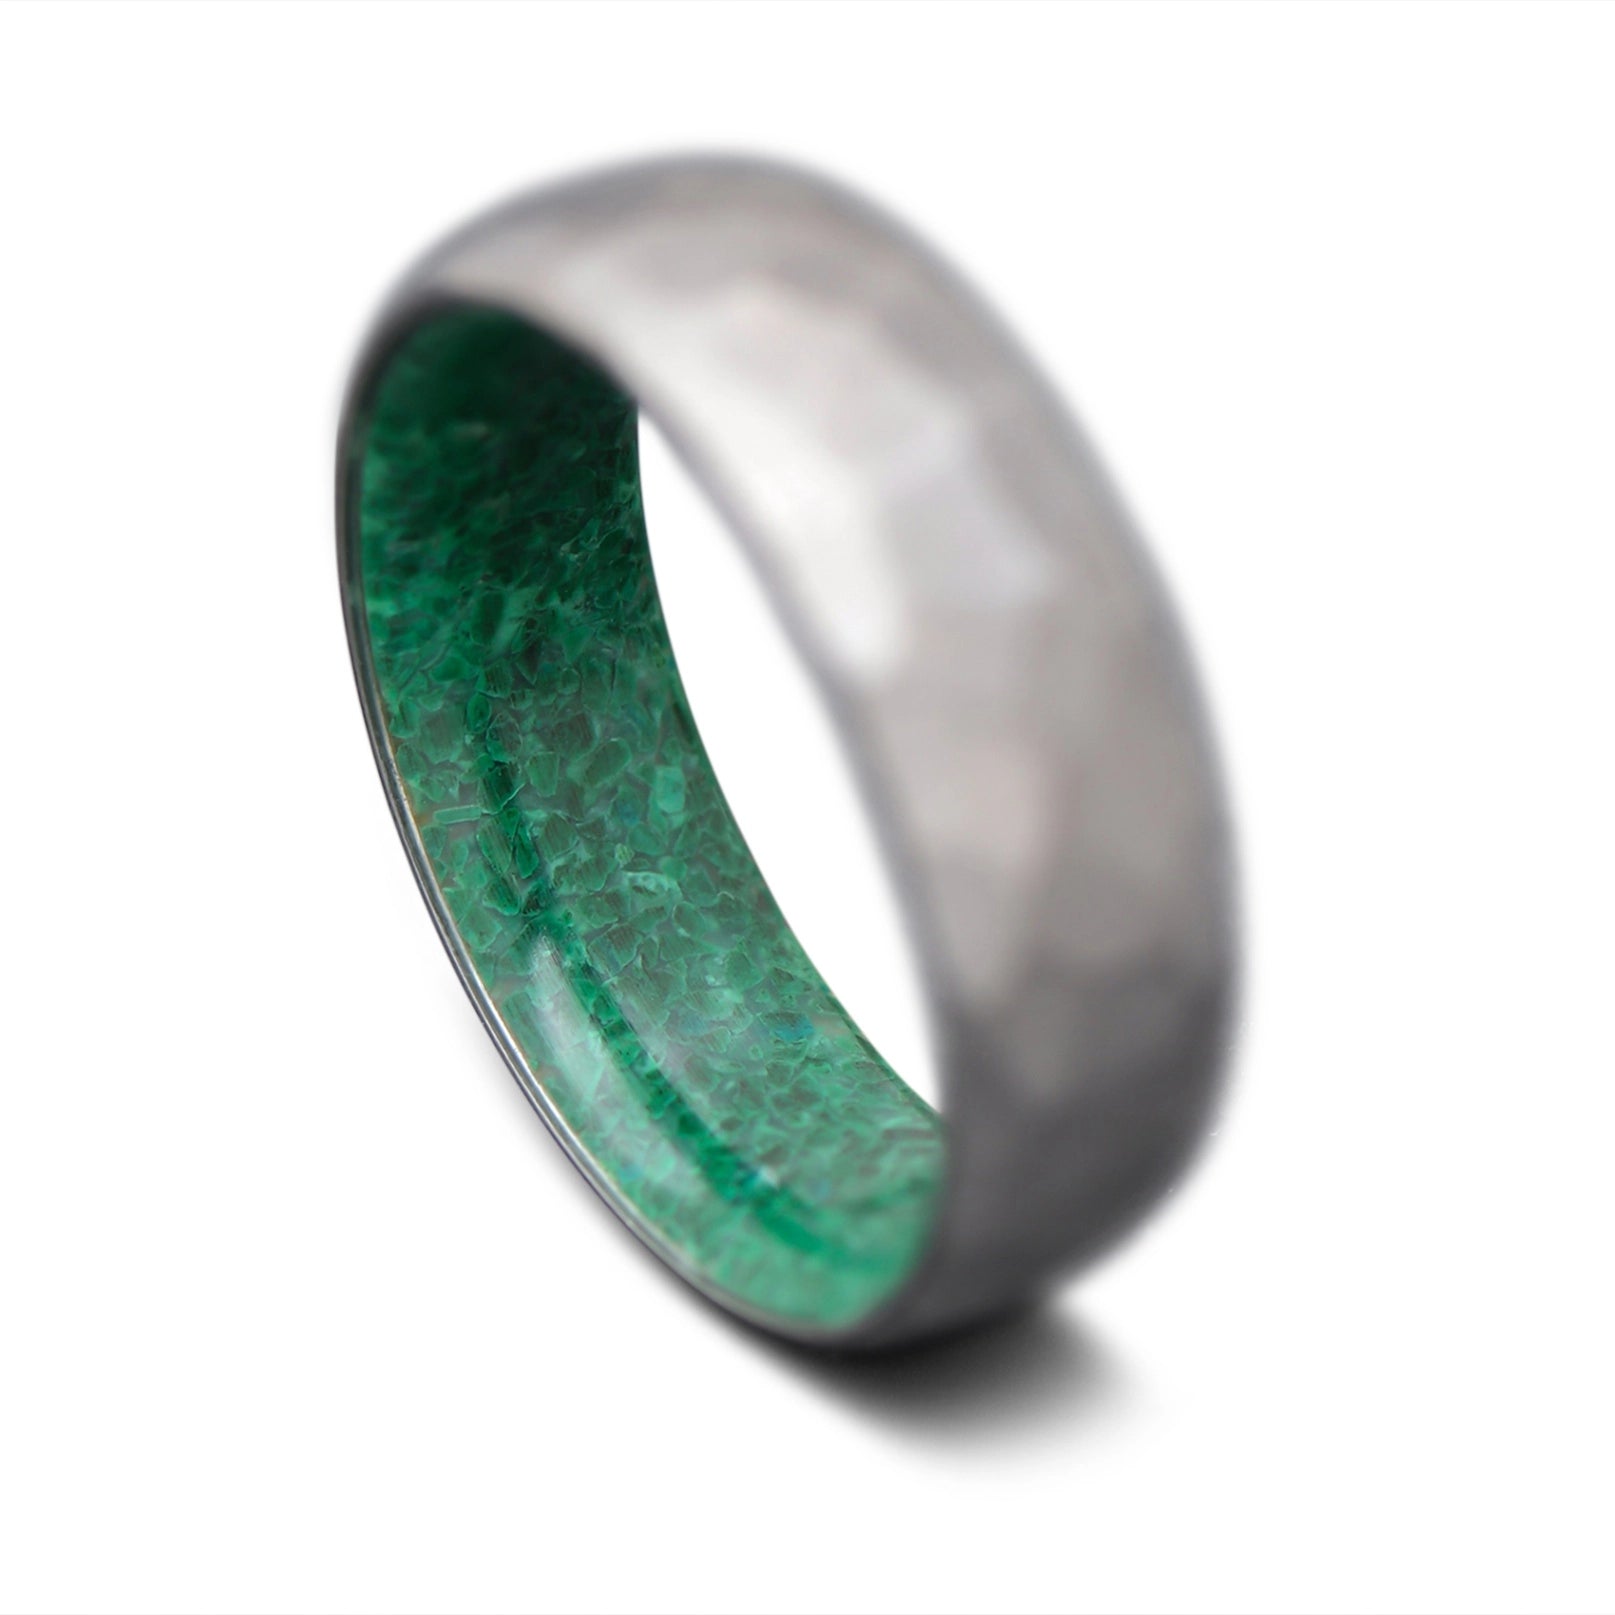 Back of Titanium Core ring with Malachite inner sleeve, 7mm -THE TITAN